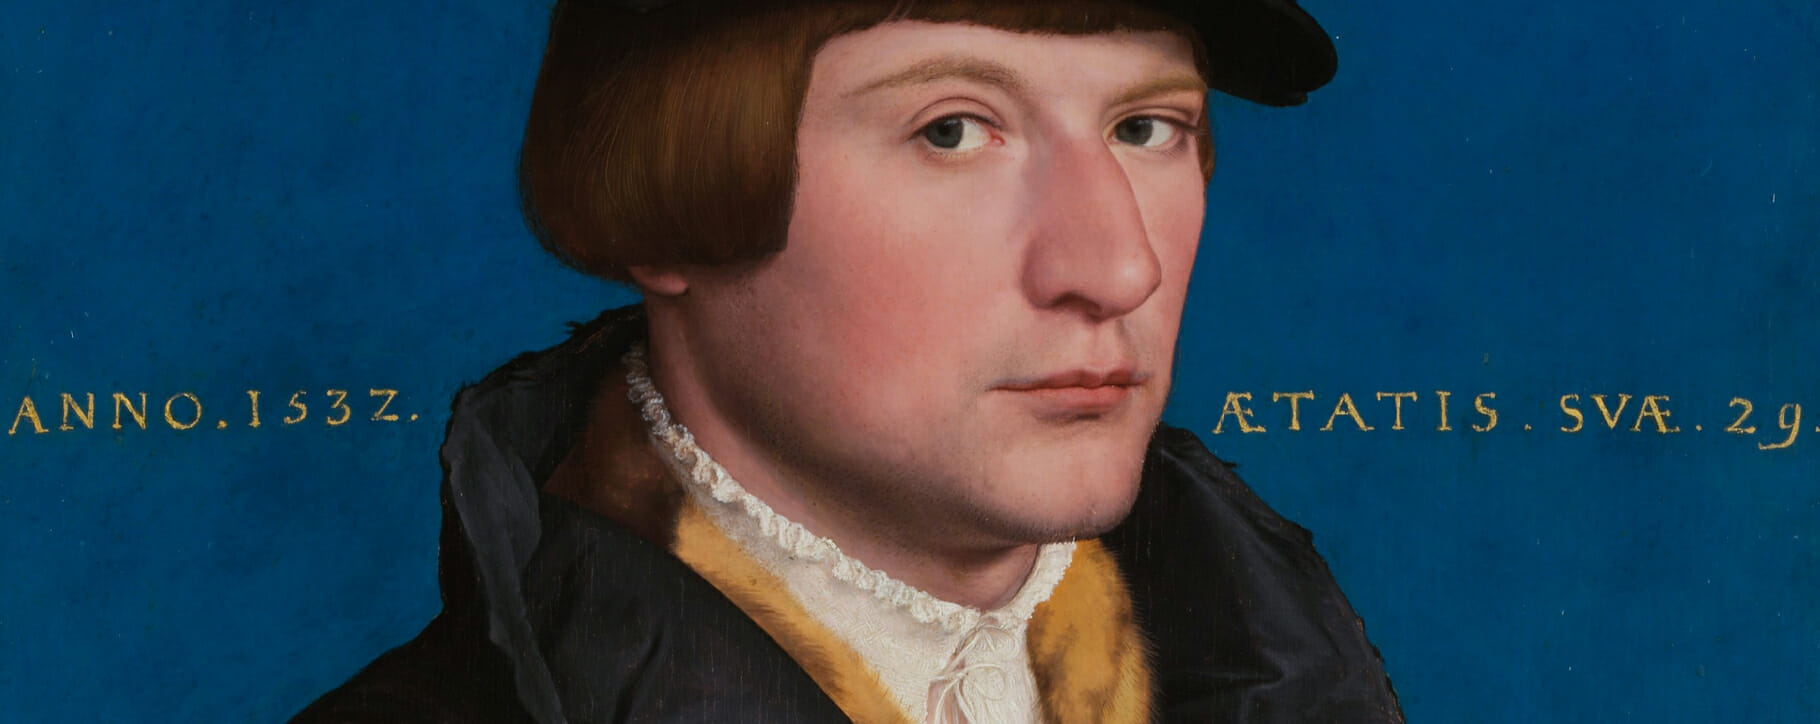 Holbein portrait with inscription